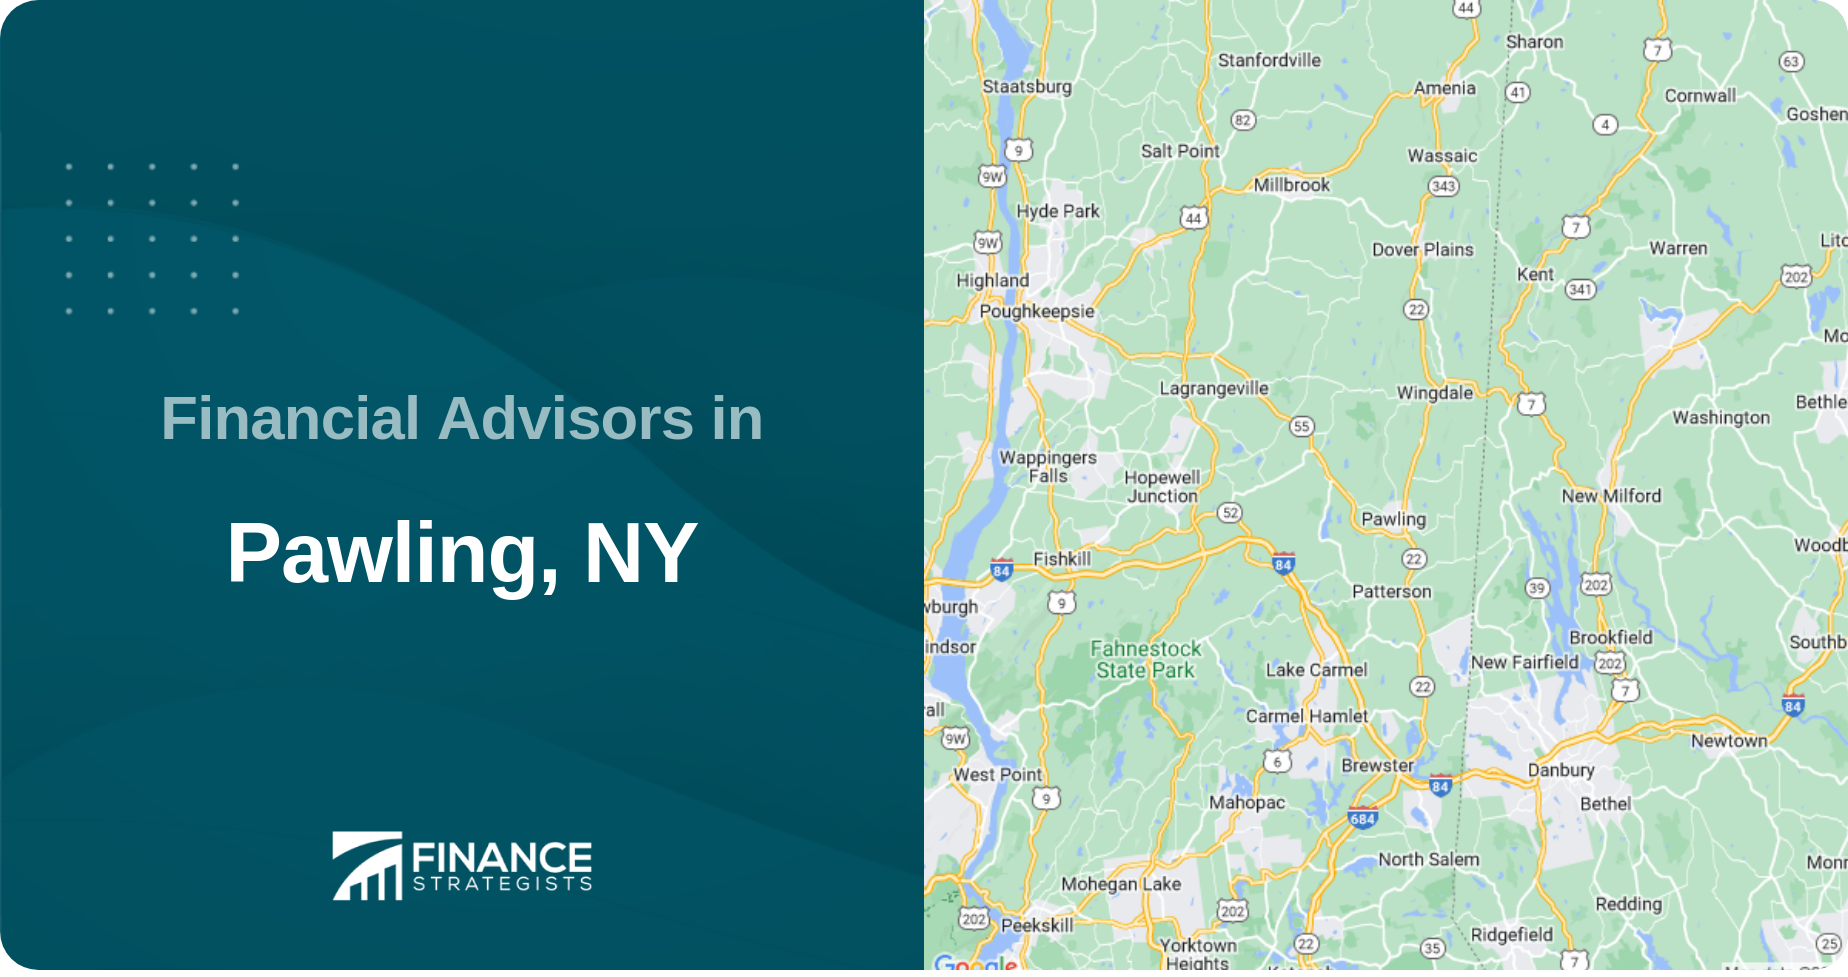 Financial Advisors in Pawling, NY